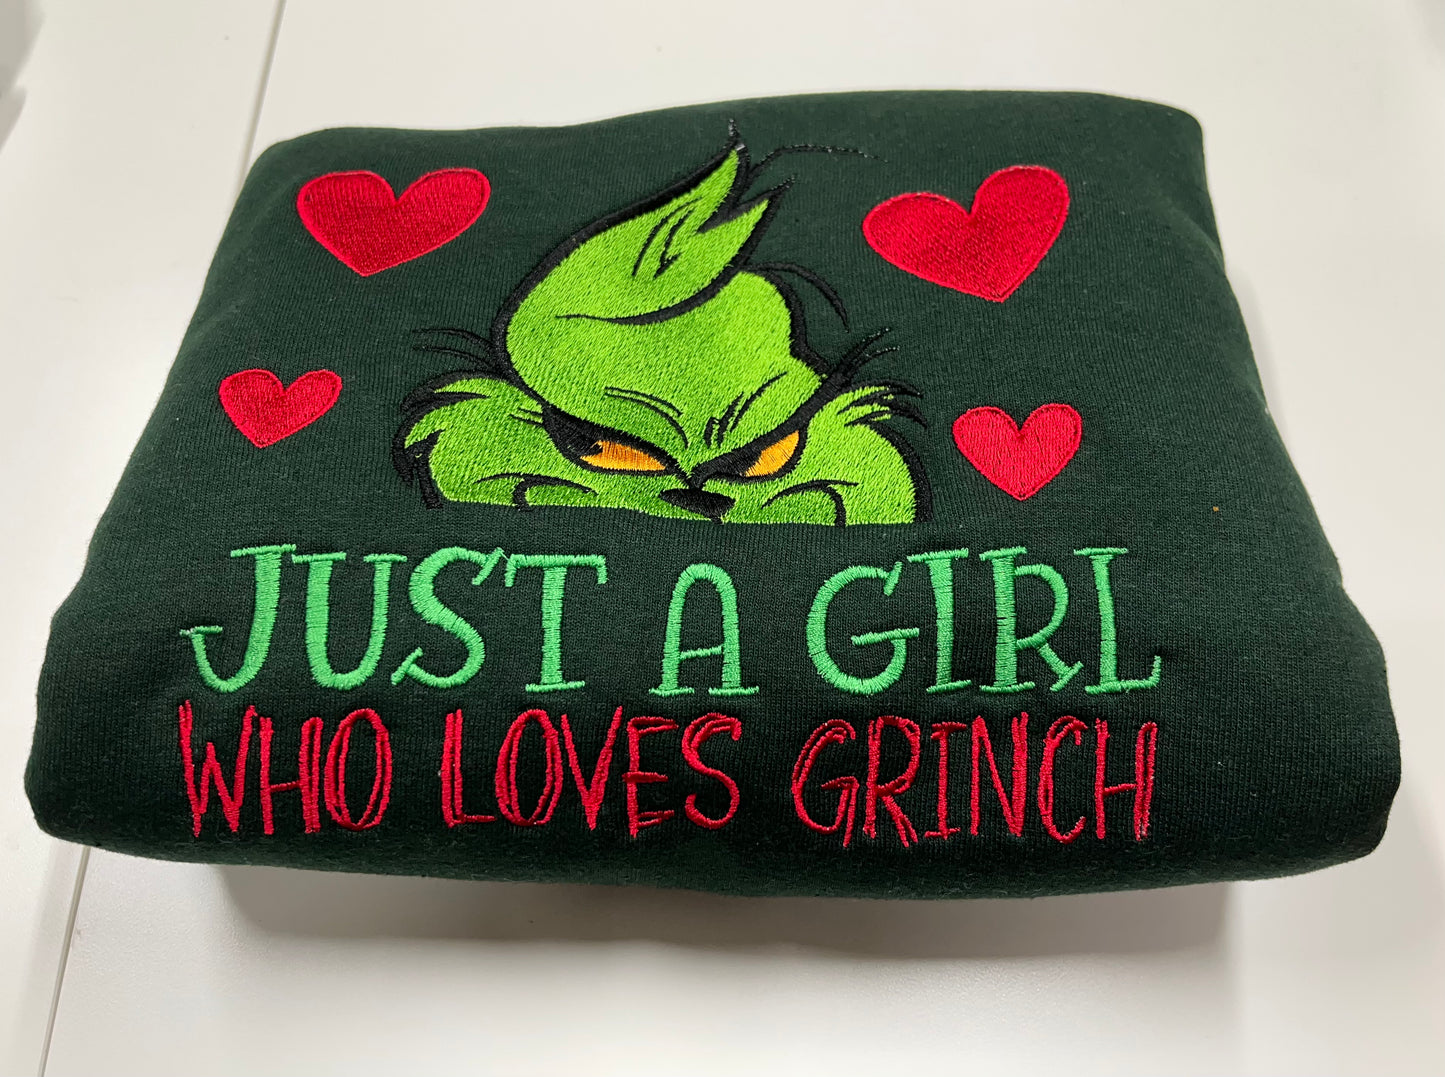 A Girl who loves Grinch